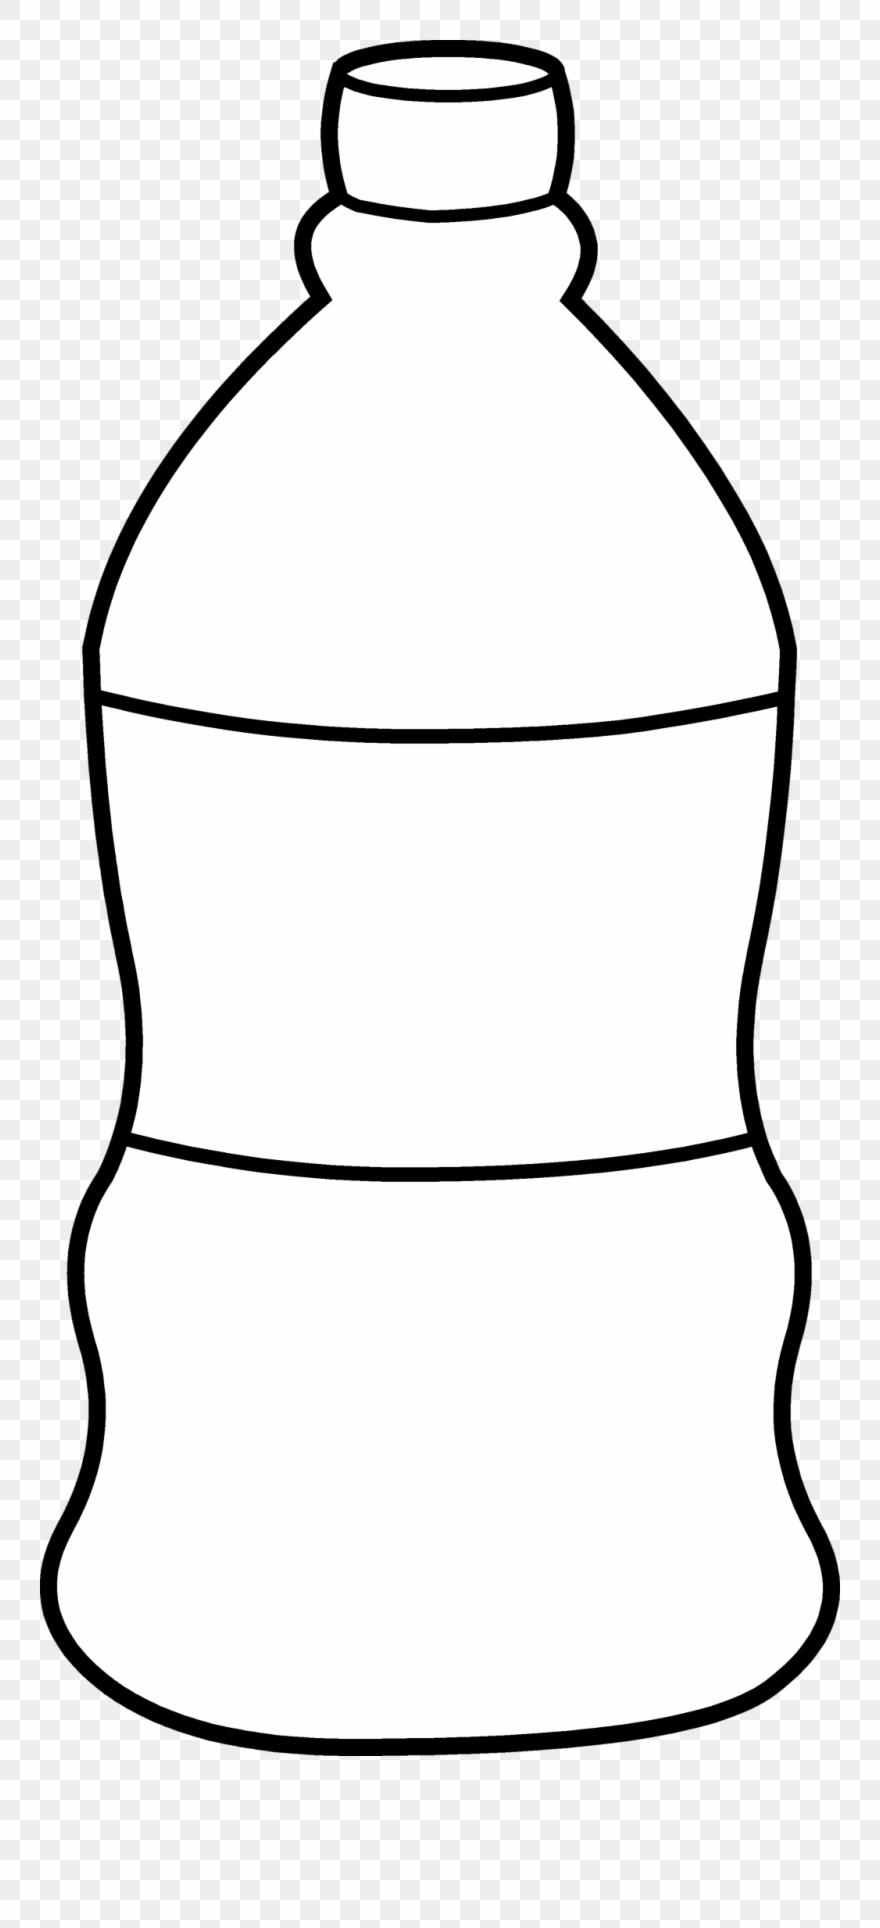 Best Water Bottle Clipart Black And White Design